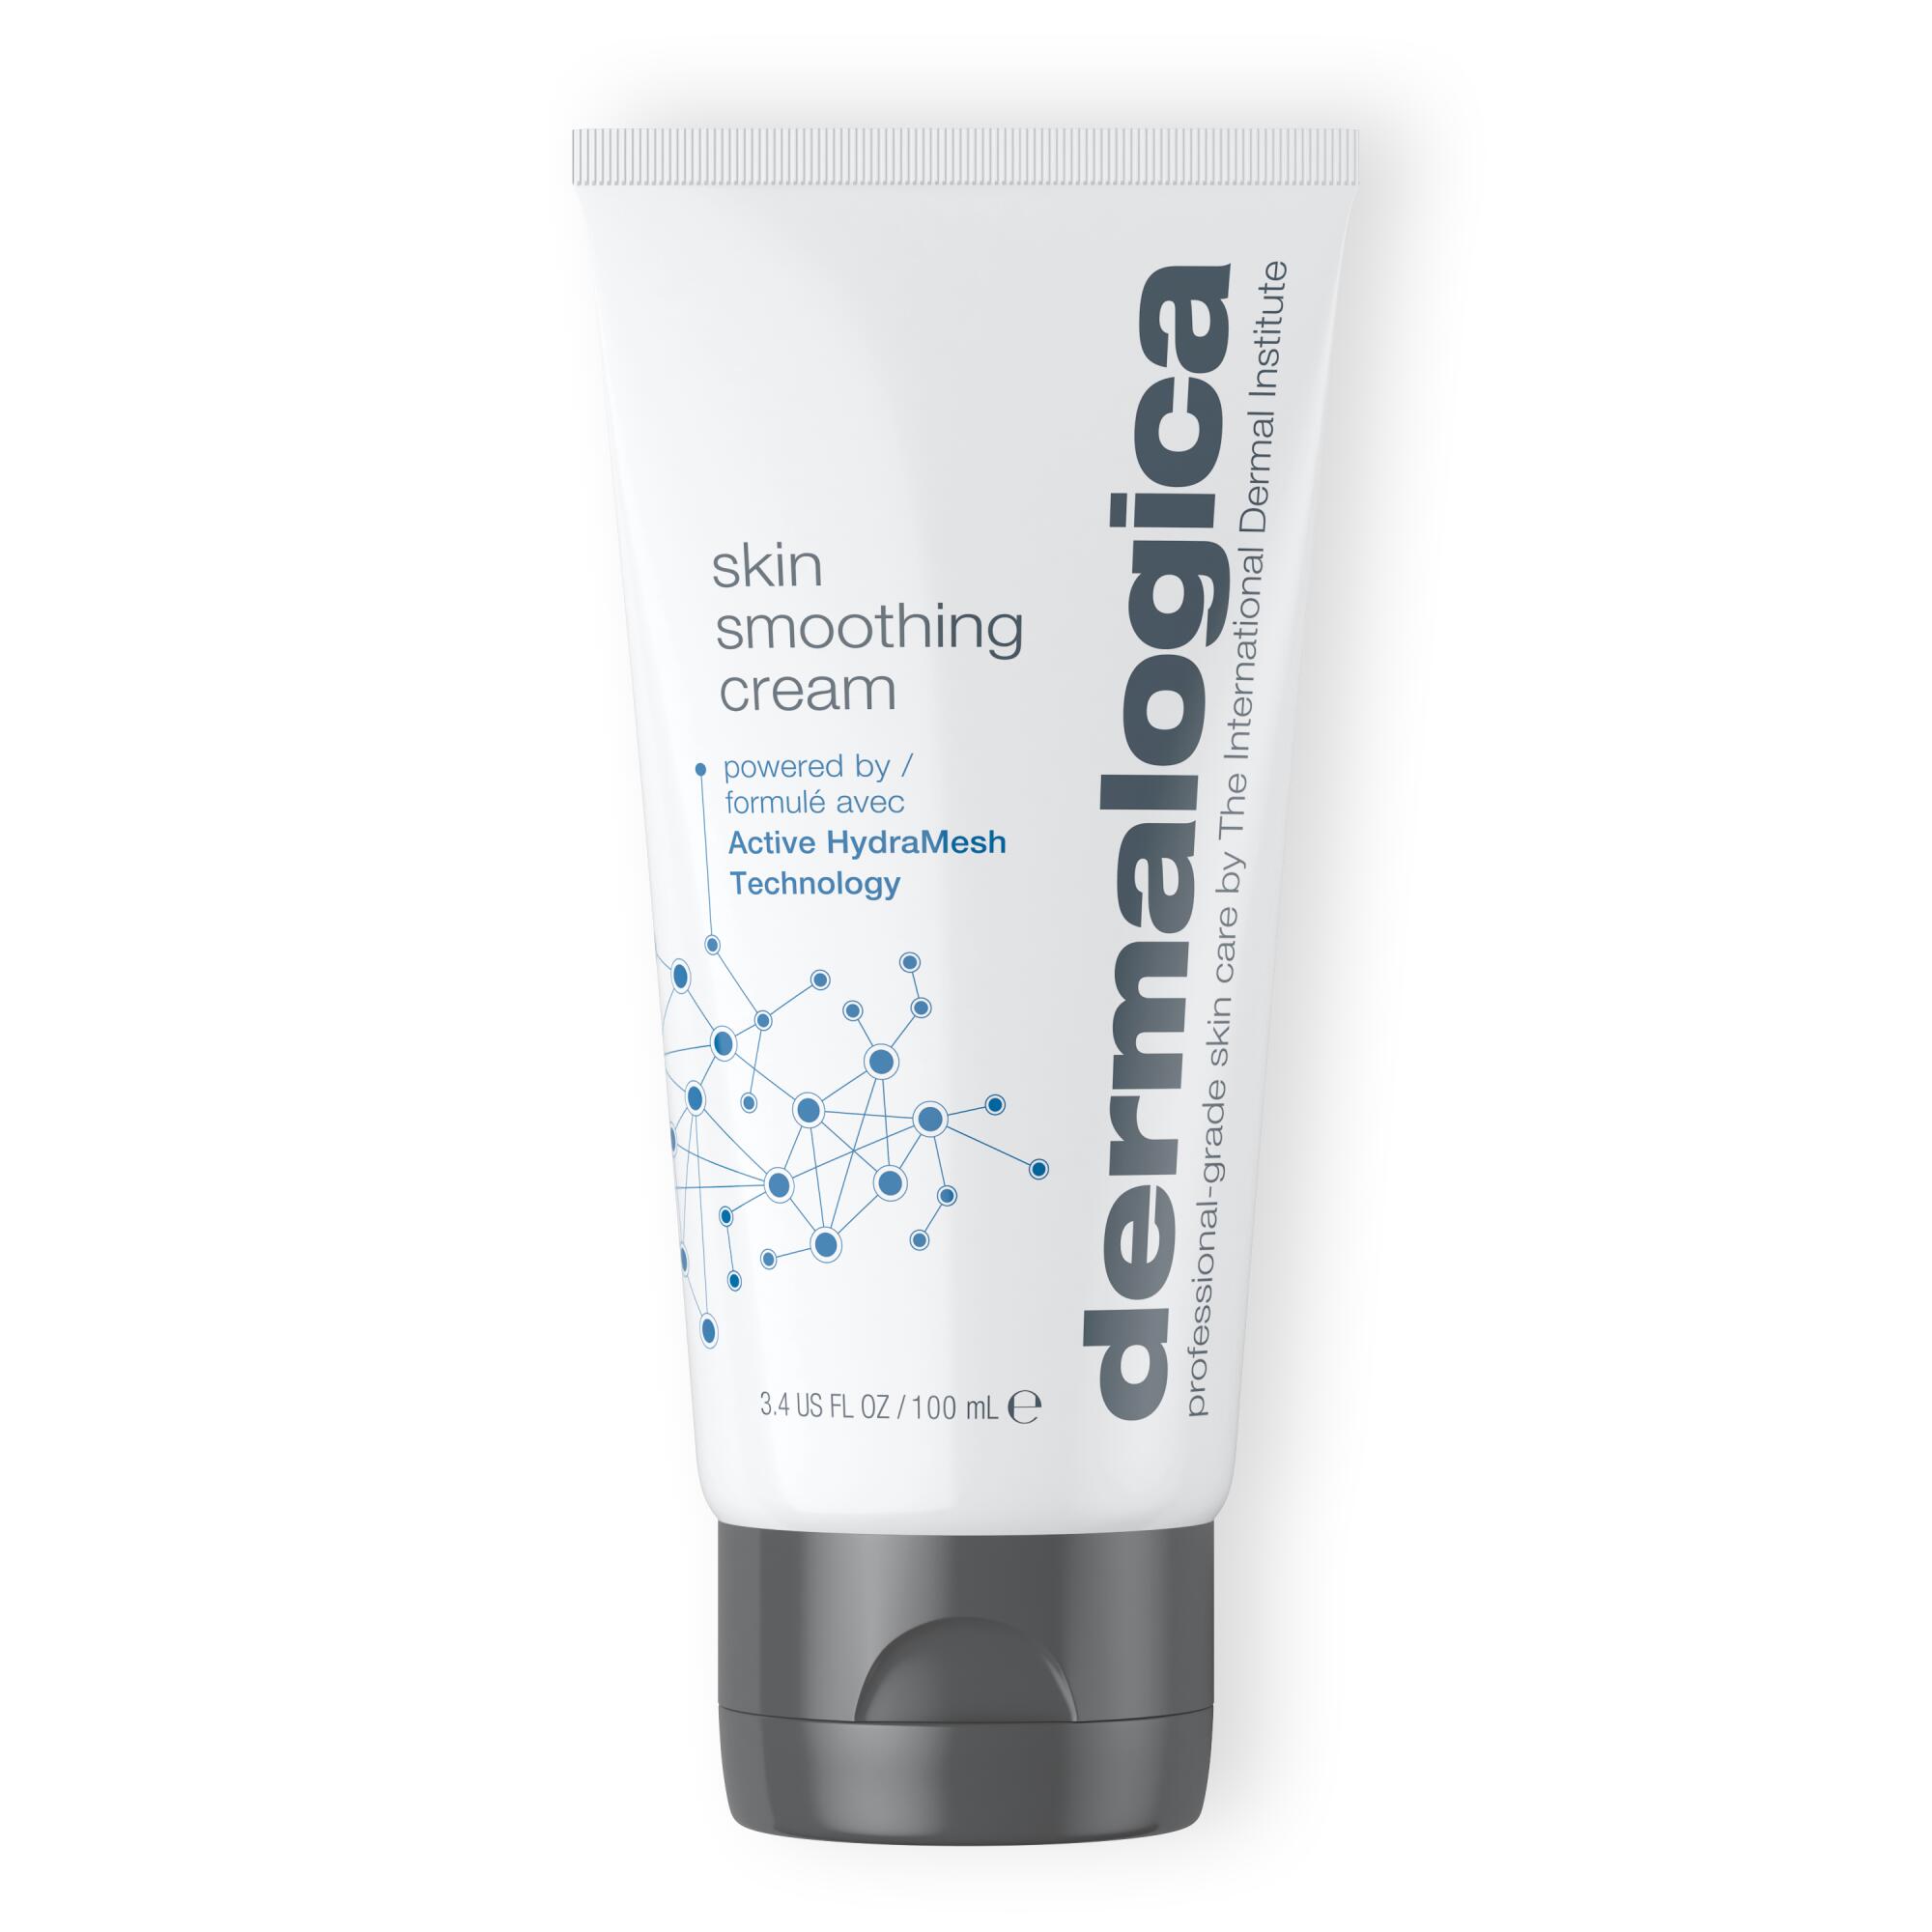 a white dermalogica skin smoothing cream bottle on a white background